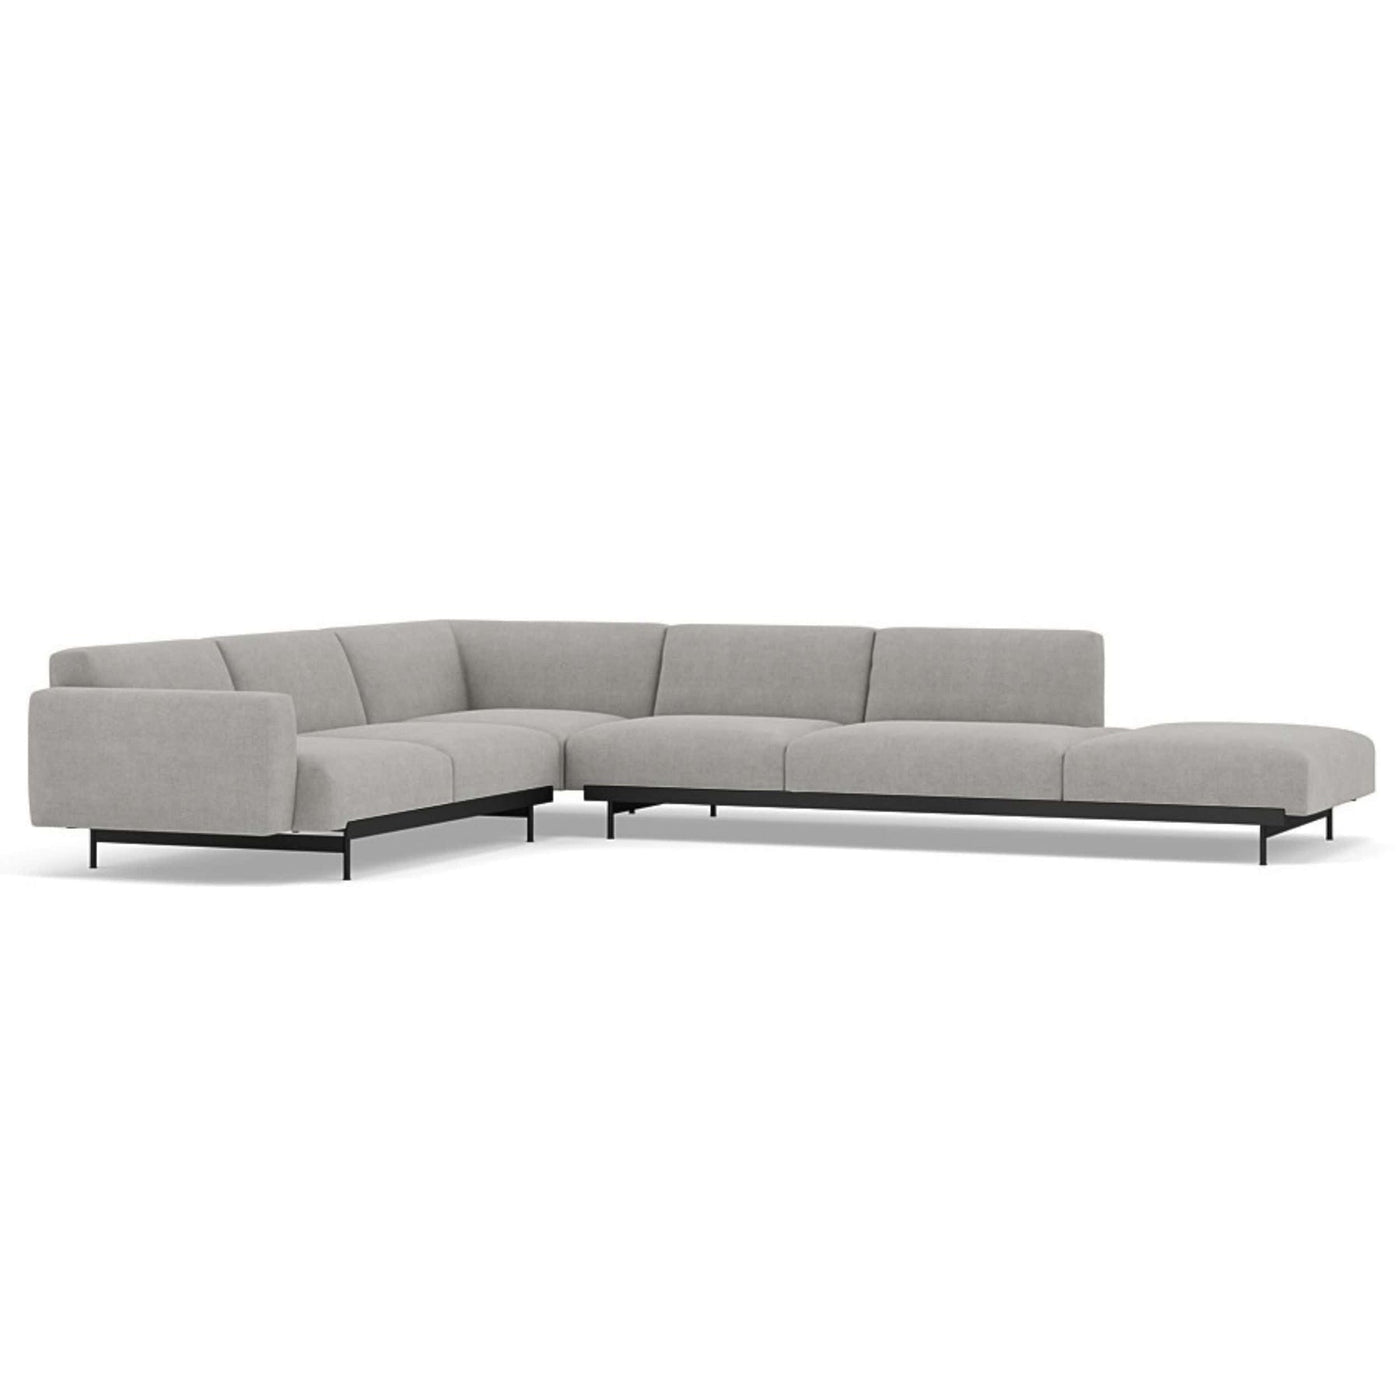 Muuto In Situ Modular Corner Sofa 7. Made to order from someday designs. #colour_fiord-151